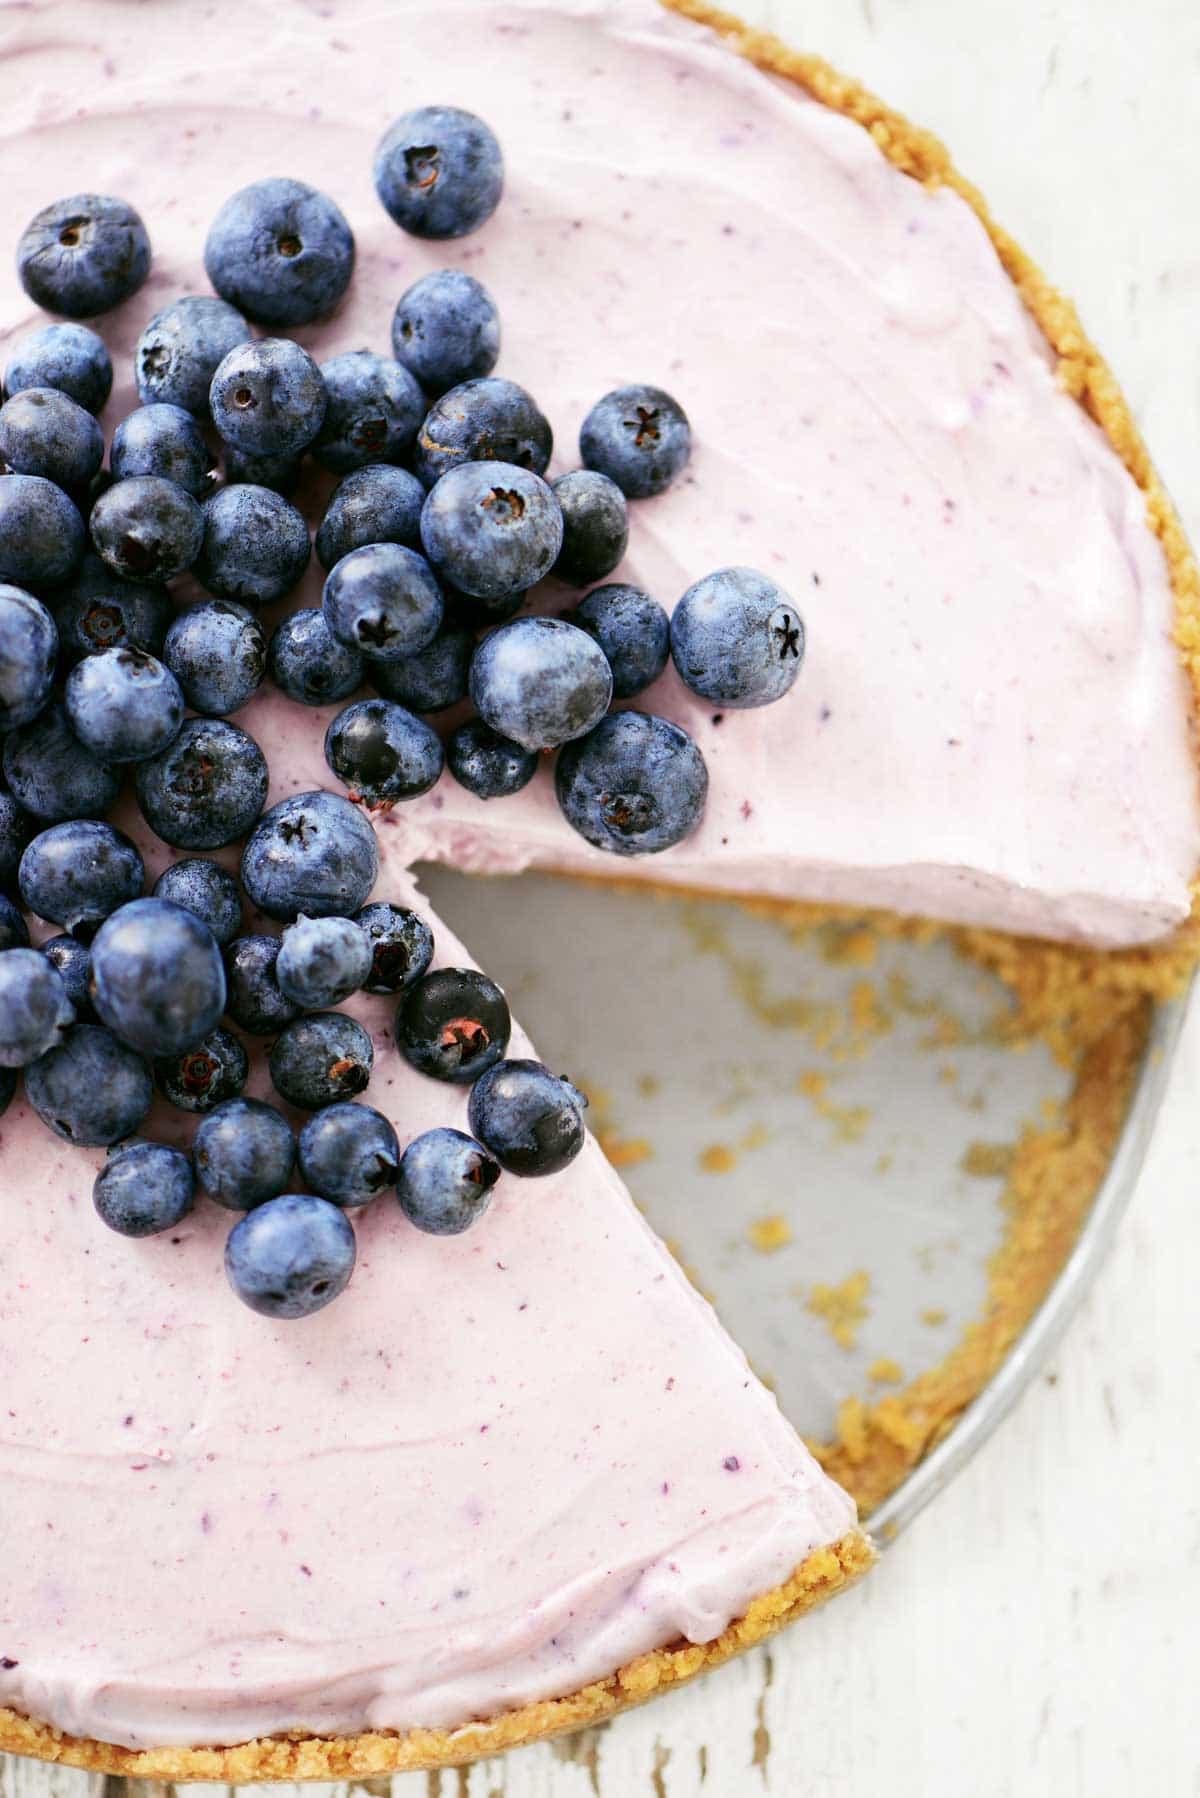 No Bake Blueberry Cheesecake with slice removed